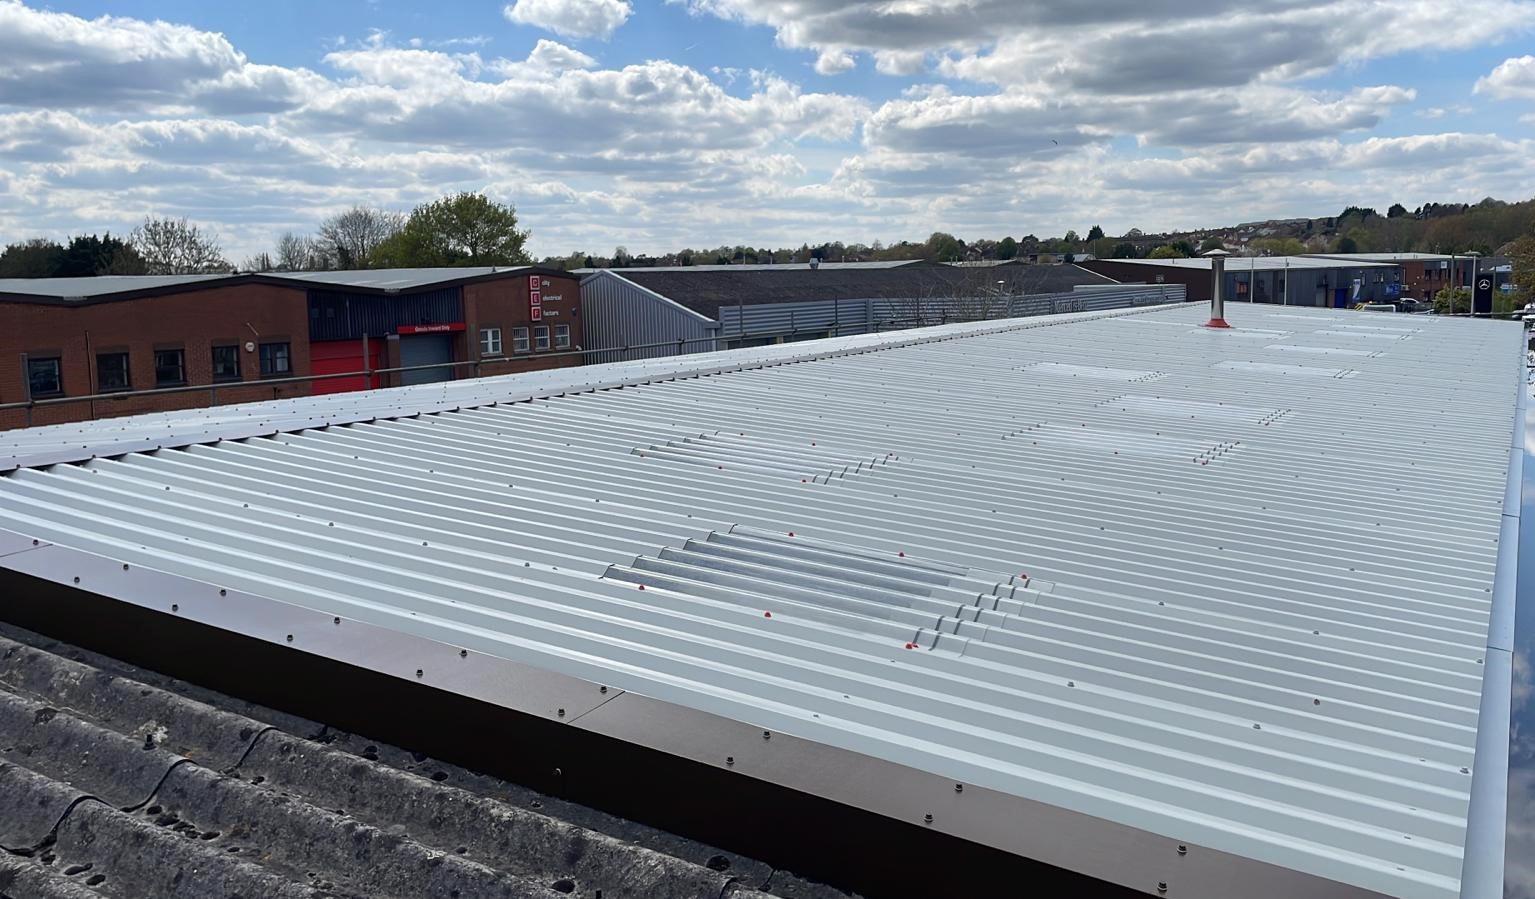 Over-roofing to an office roof in Aldershot, Hampshire